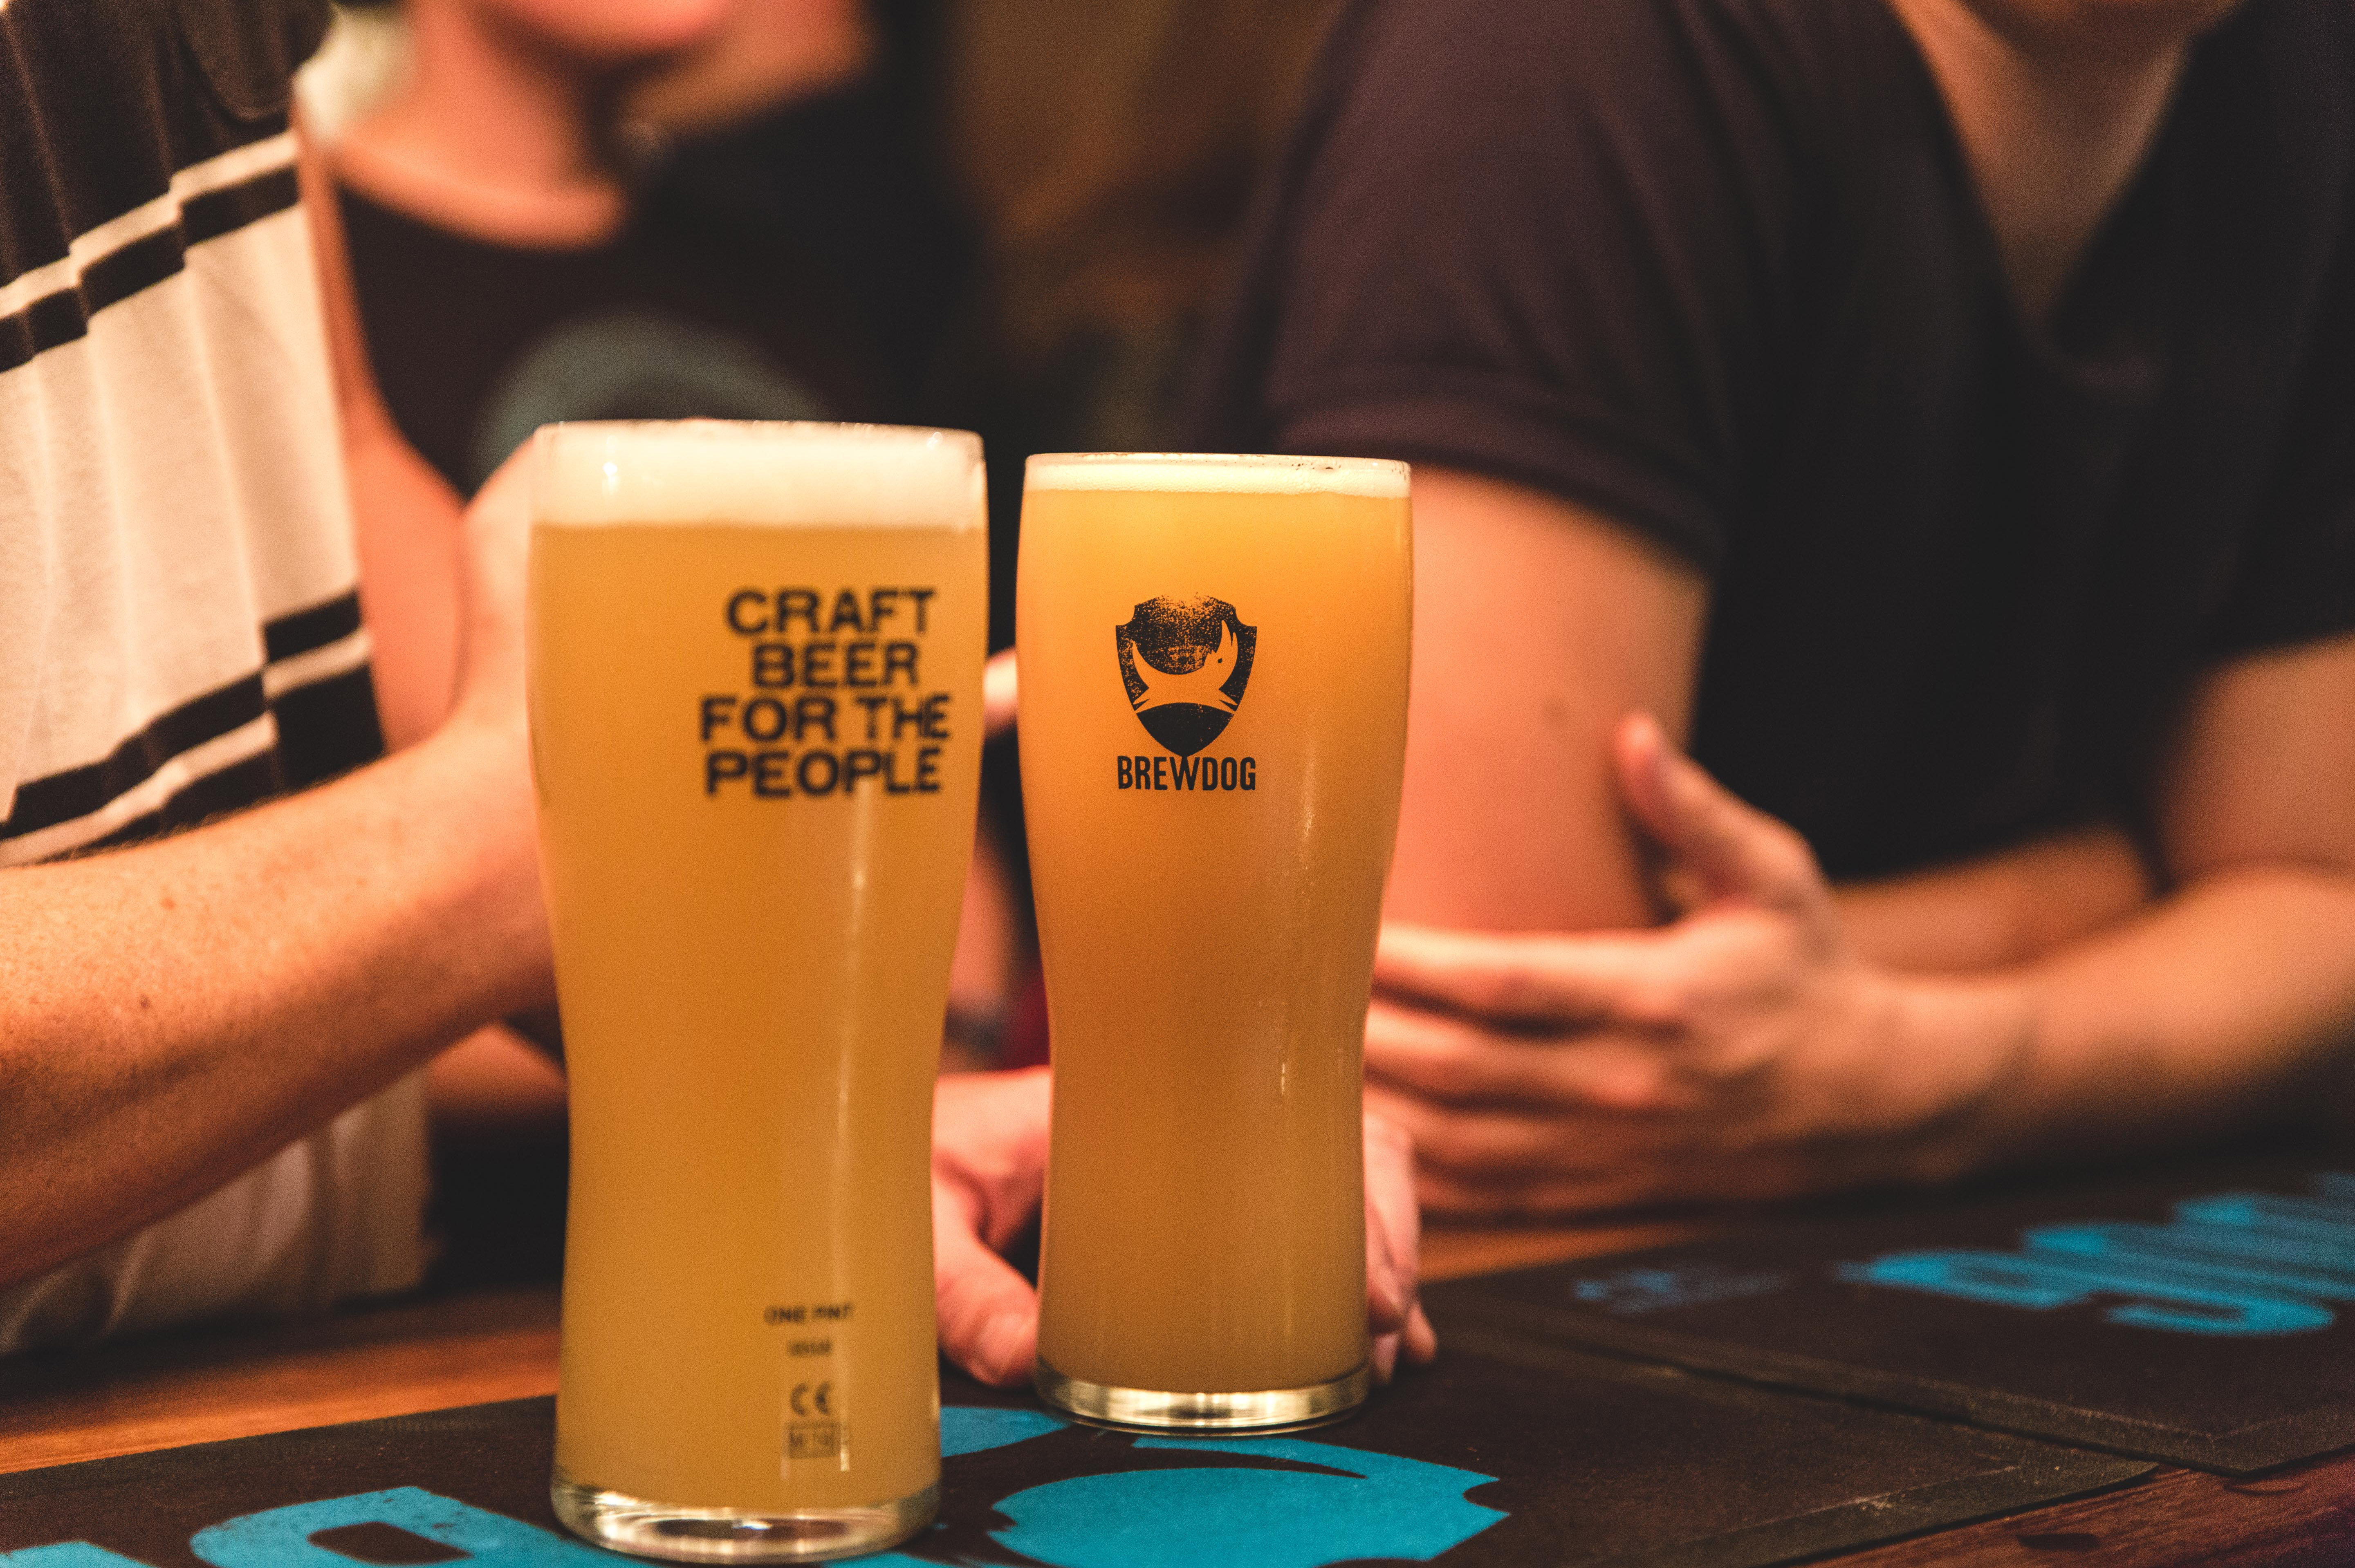 Craft Beer for the People draft glasses